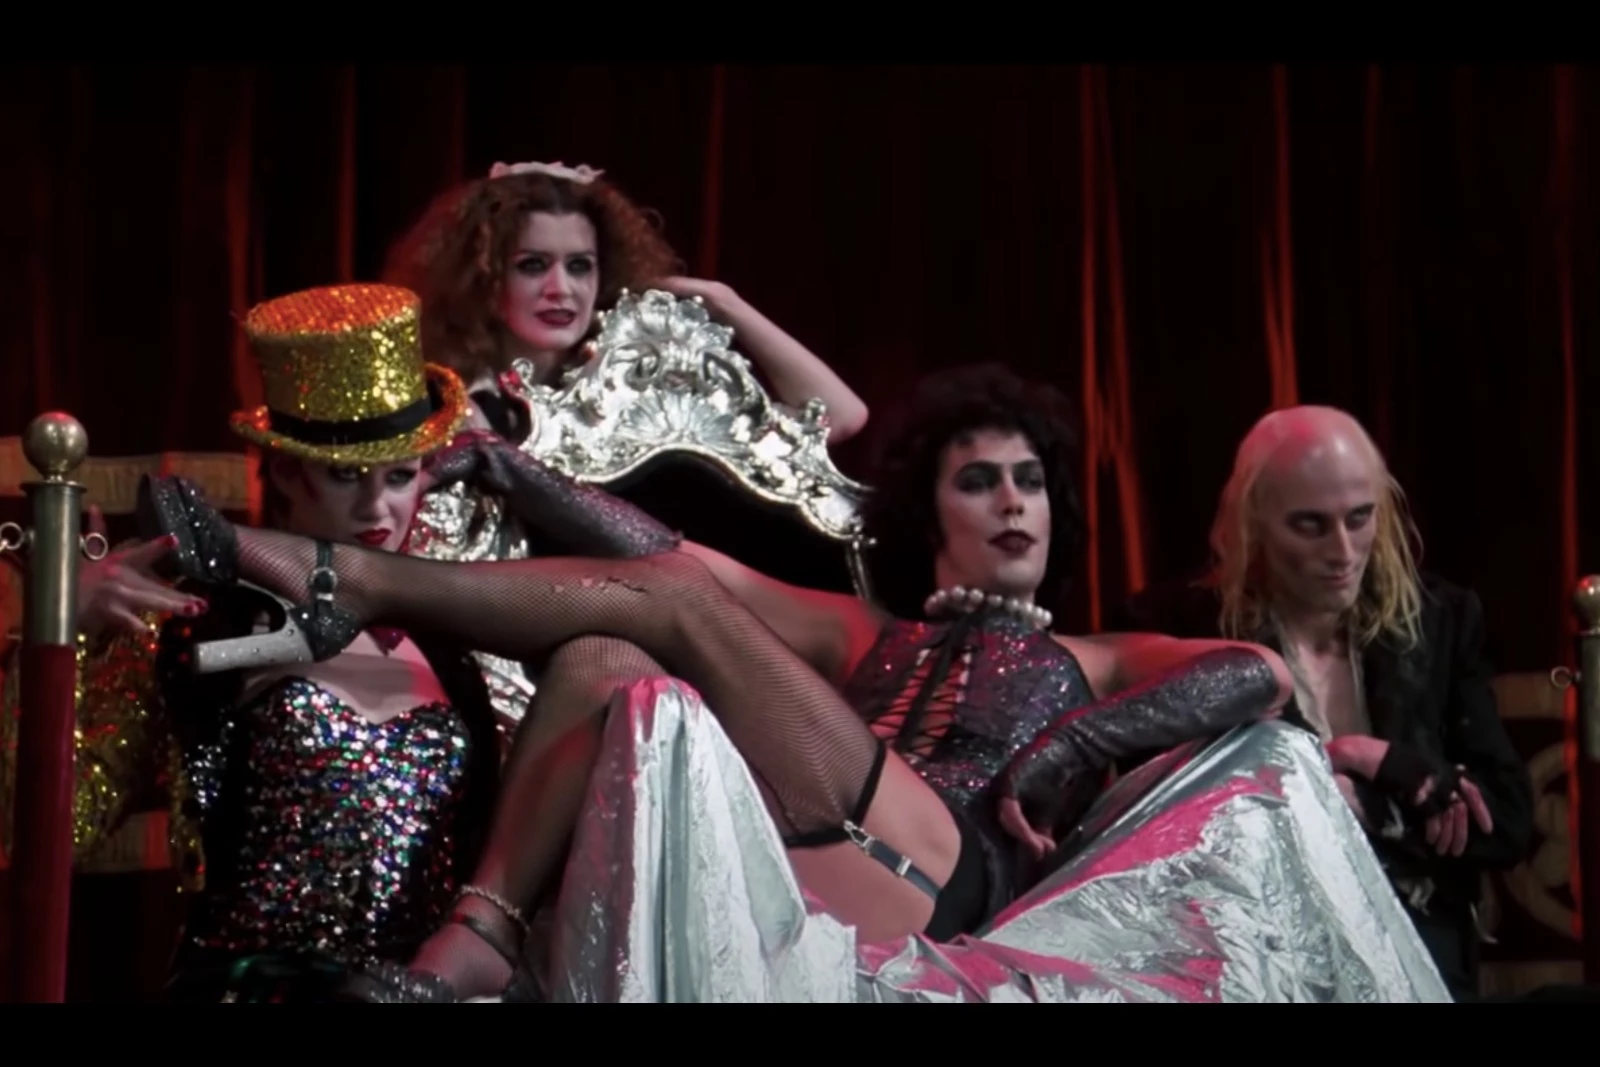 Teensex With Godfather - Rocky Horror Picture Show coming to State Theatre New Jersey